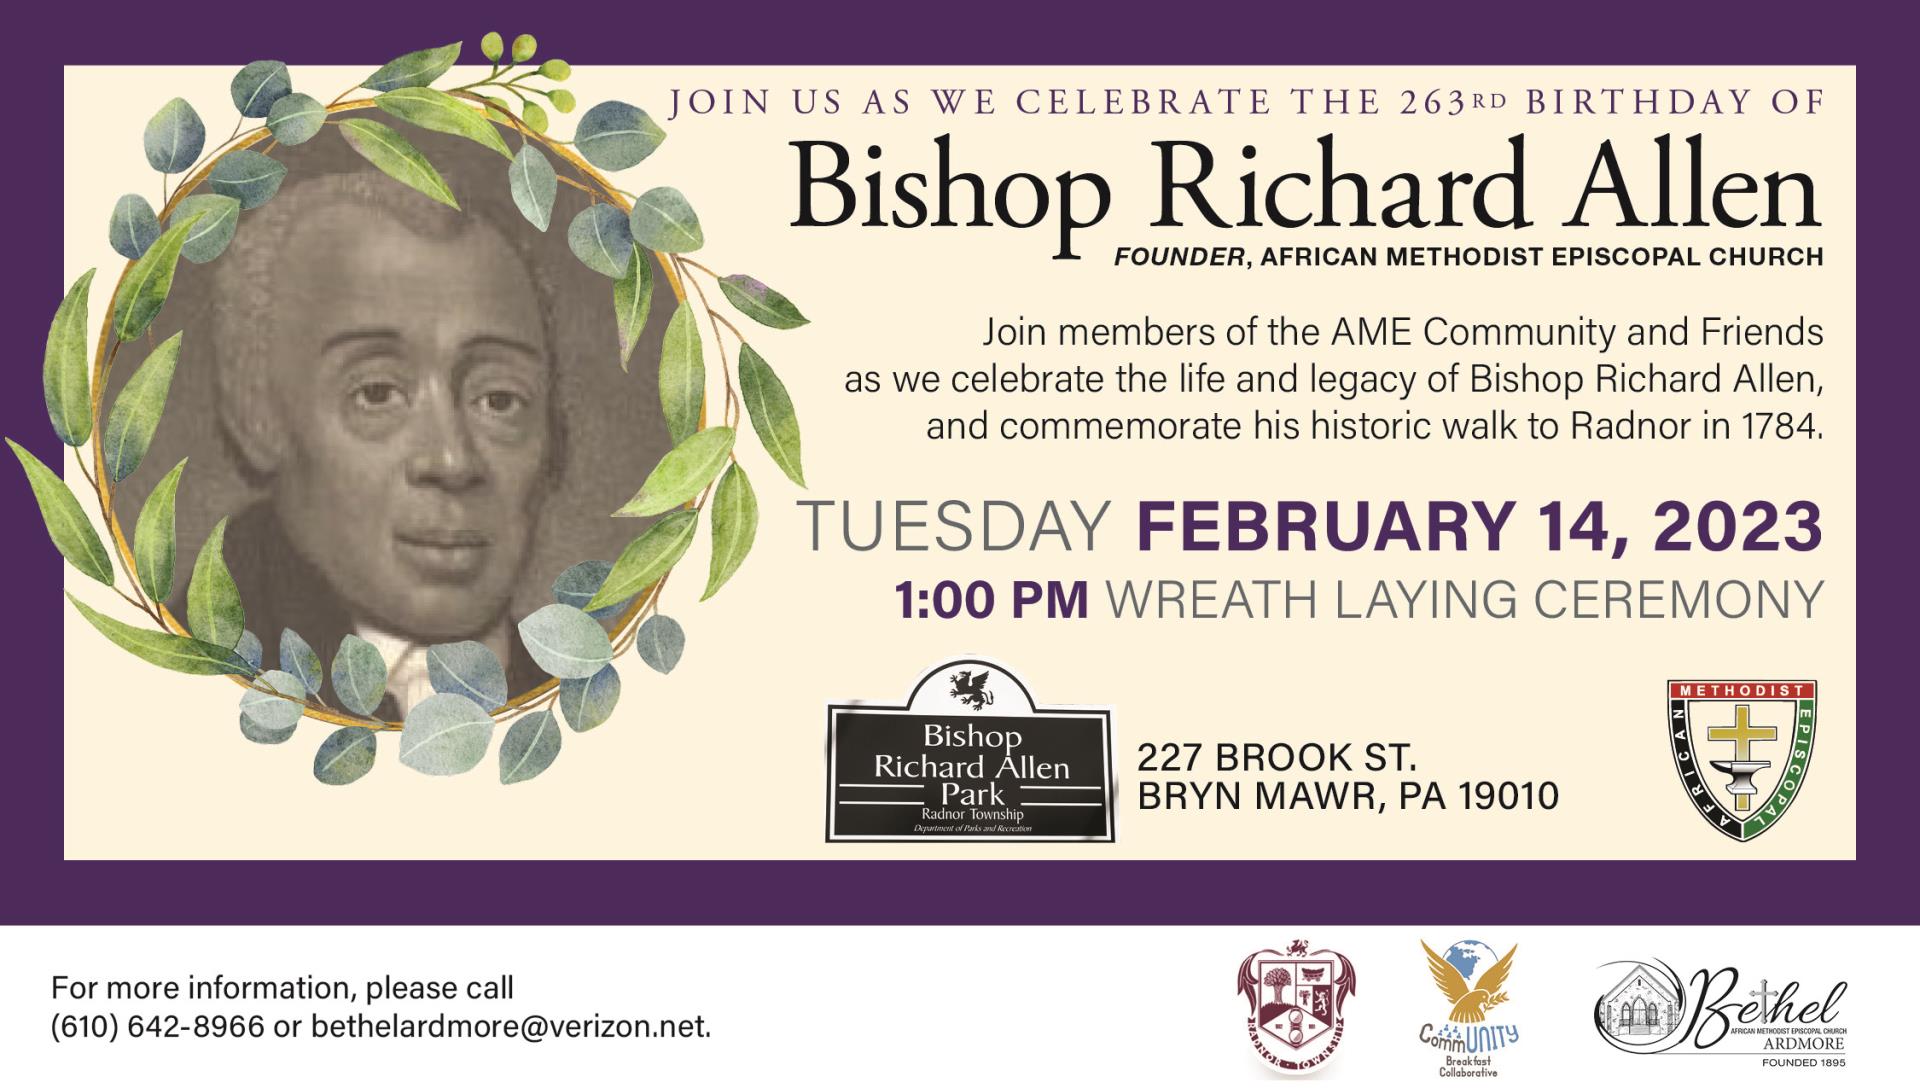 Tuesday, February 14: Bishop Richard Allen Wreath Laying Ceremony